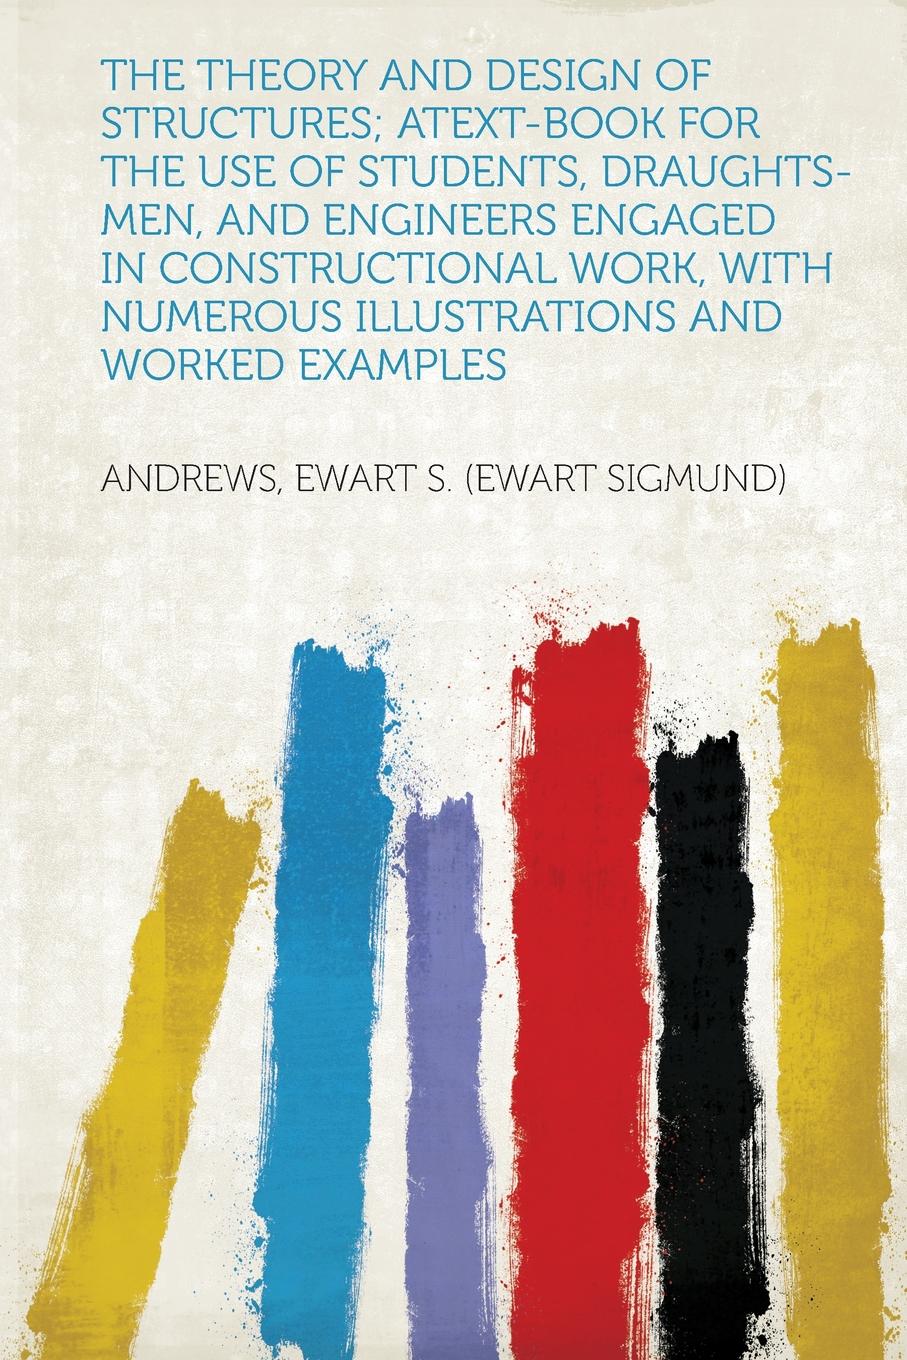 The Theory and Design of Structures; Atext-Book for the Use of Students, Draughts-Men, and Engineers Engaged in Constructional Work, With Numerous Illustrations and Worked Examples